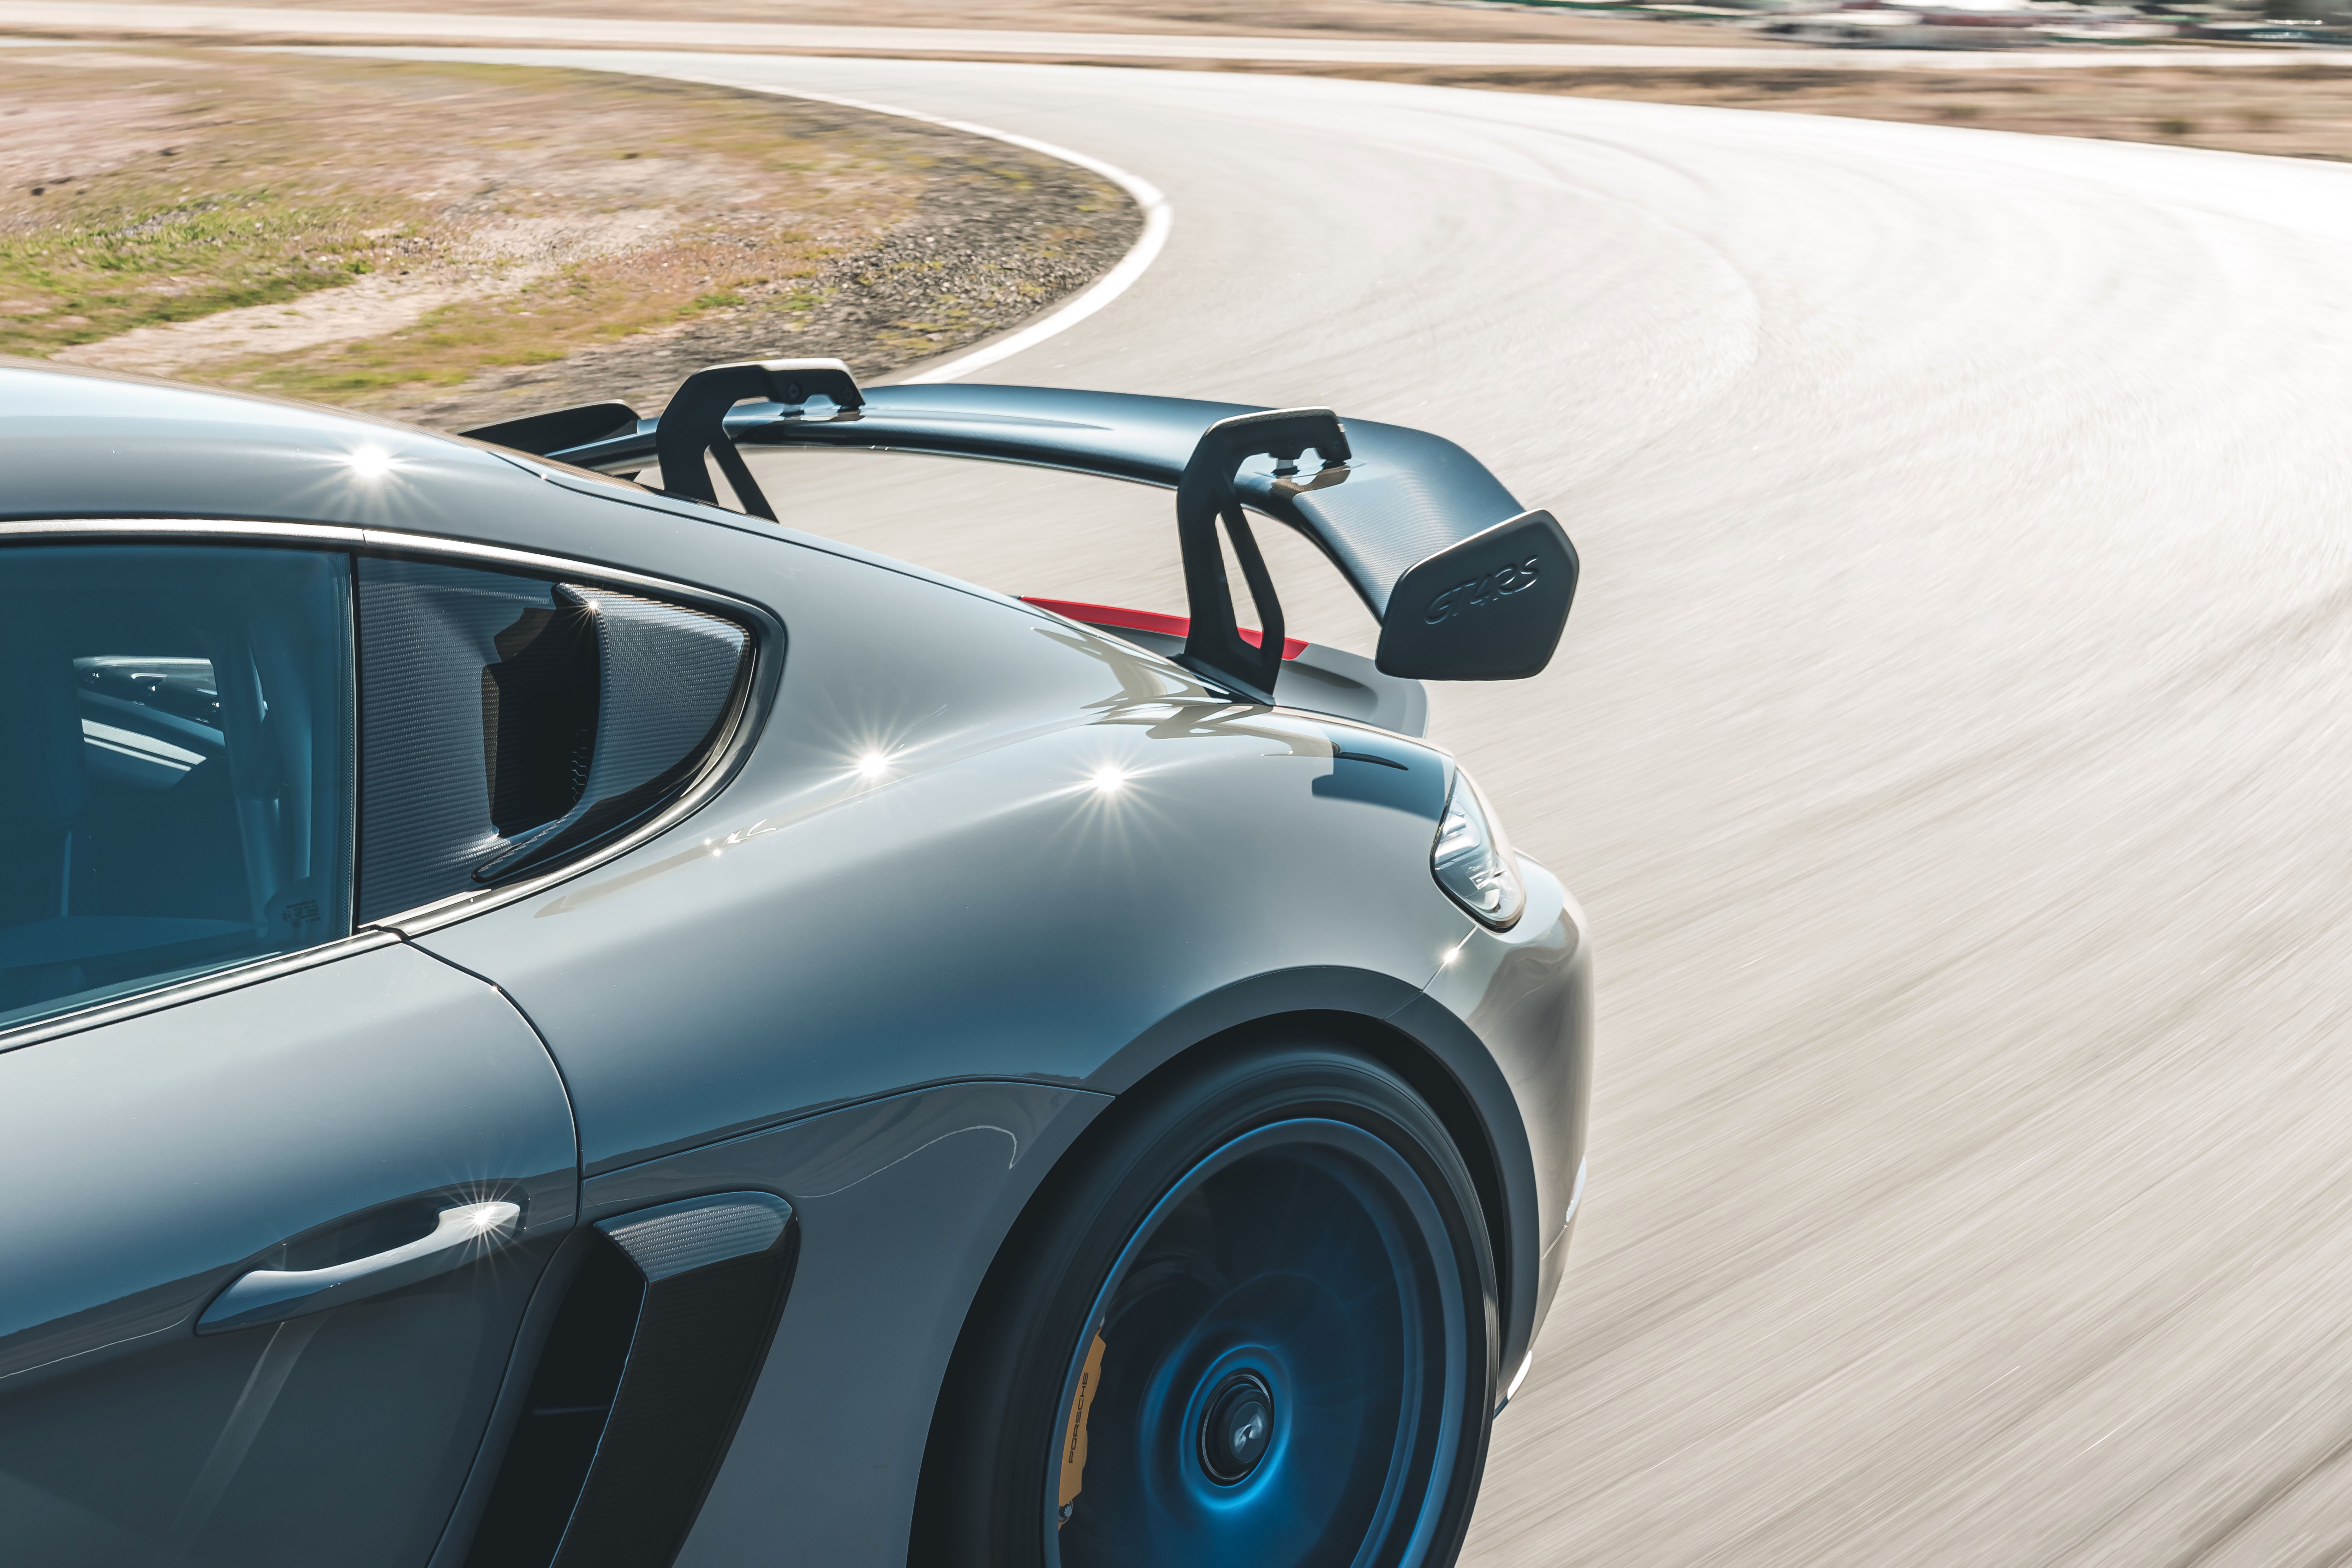 The rear wing of the Porsche Cayman GT4 RS.